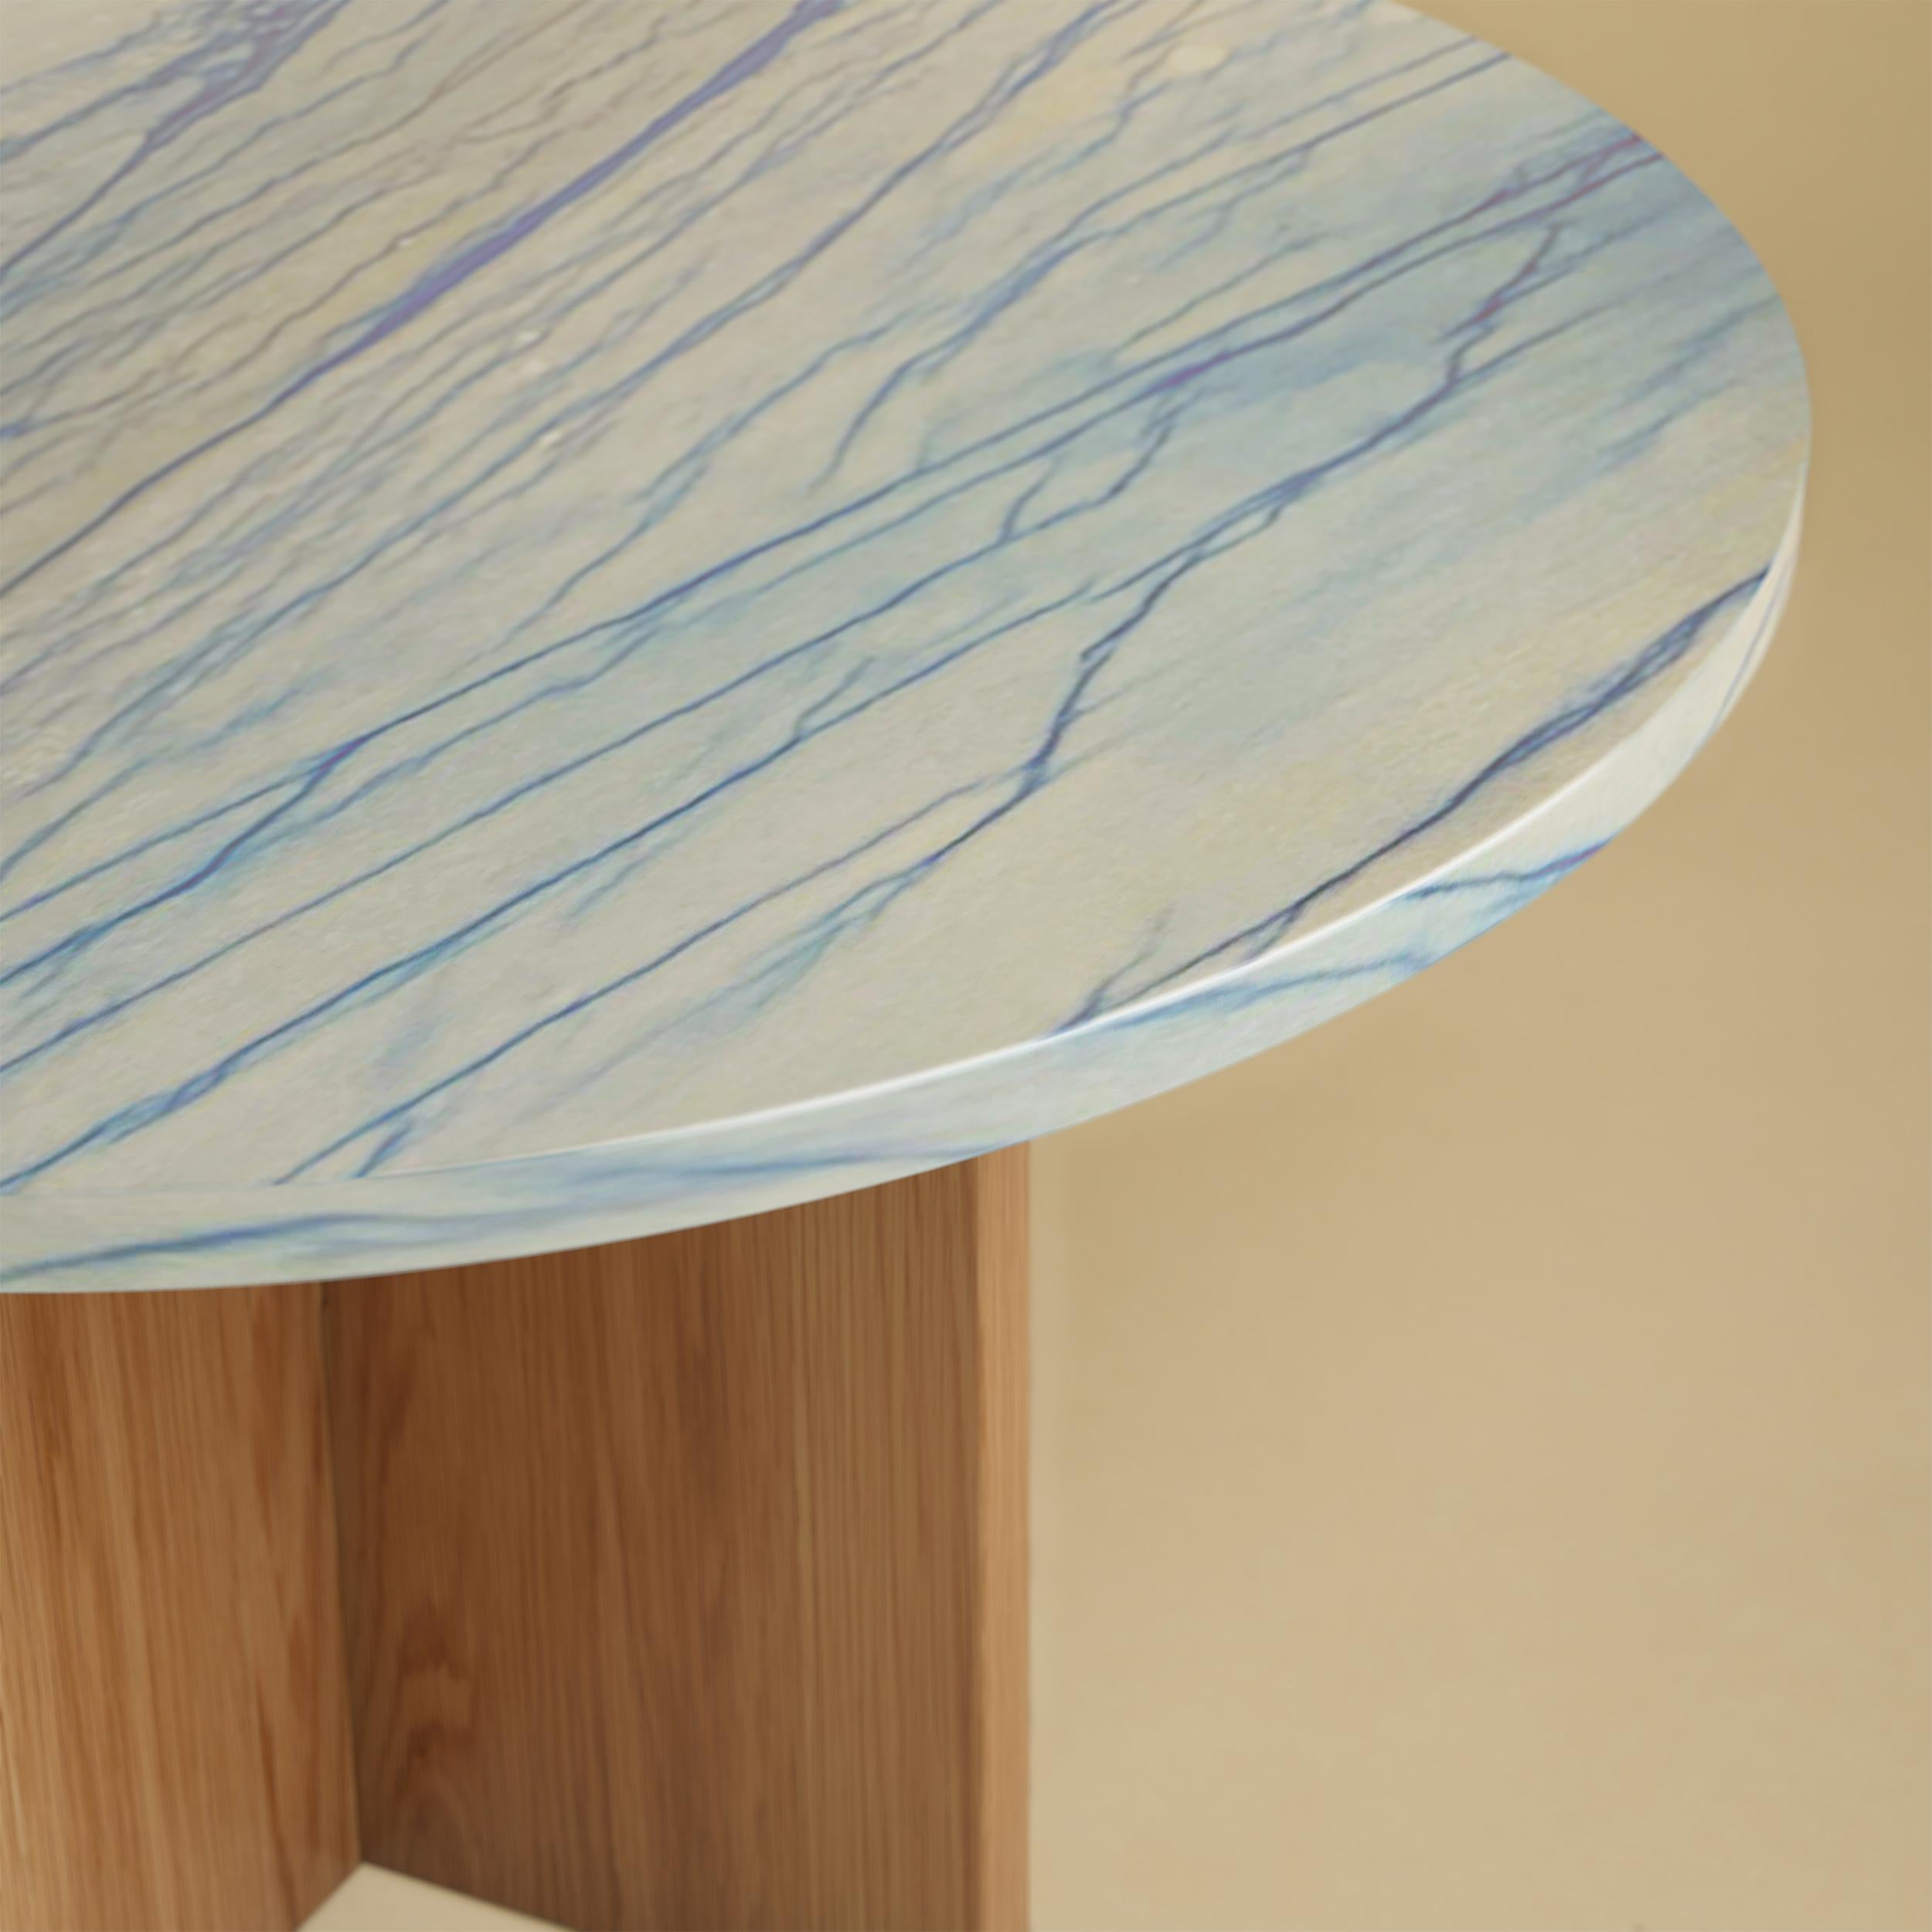 The Tinian coffee table is produced with an oak wood base and a luxury Azul Macaubas marble top. The top is circular and 60cm in diameter, while the base is obtained by gluing oak planks perpendicular to each other.
Artisanal production made of